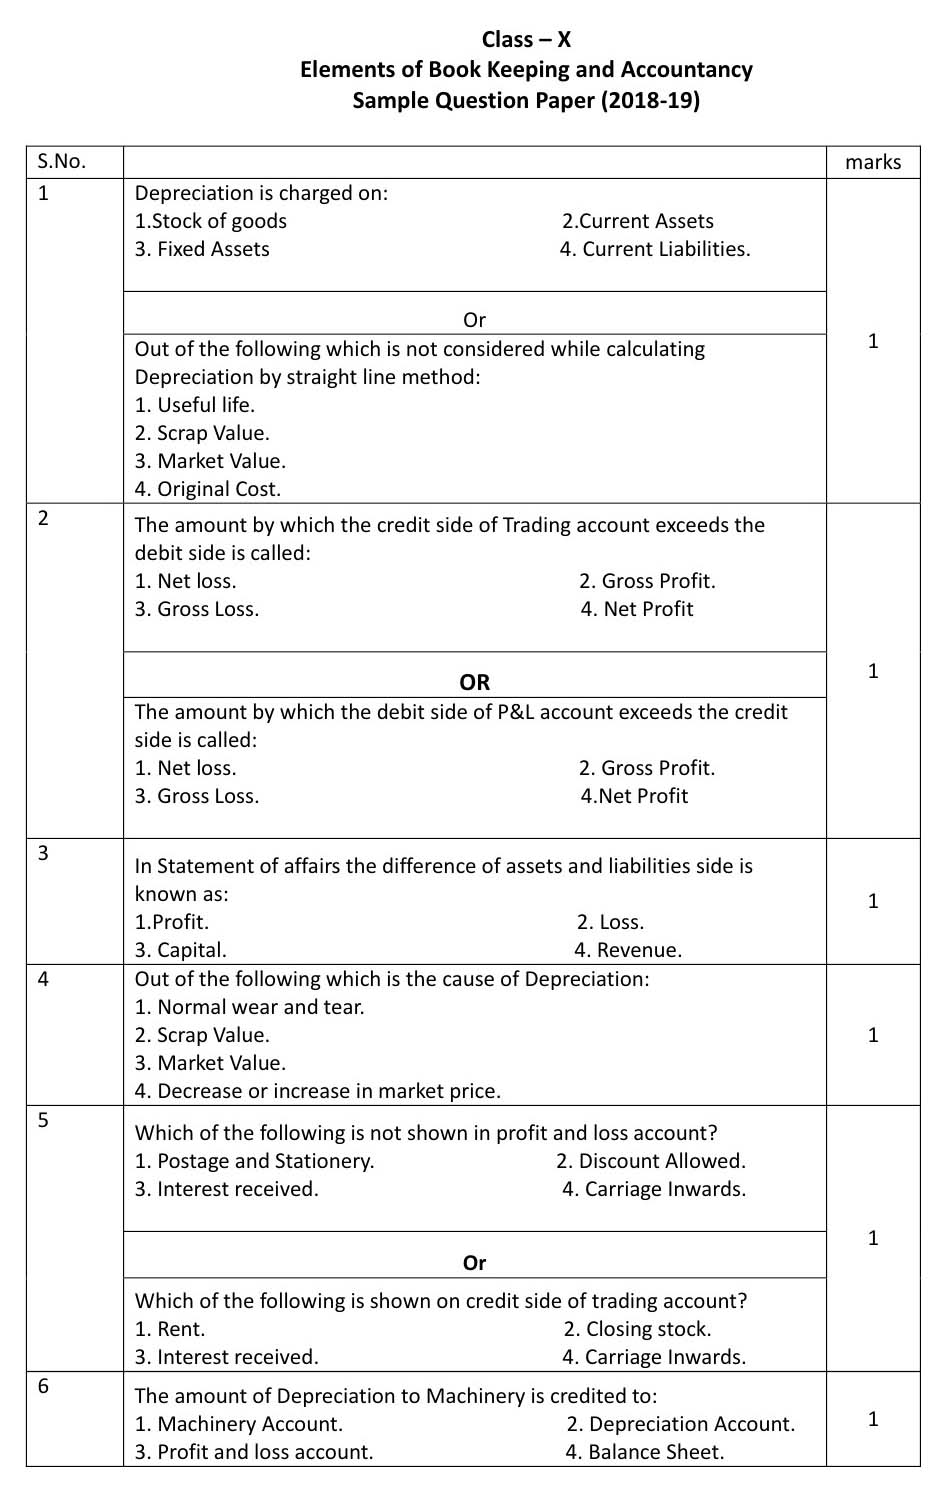 Elements of Book Keeping And Accountancy CBSE Class X Sample Question Paper 2018-19 - Image 1